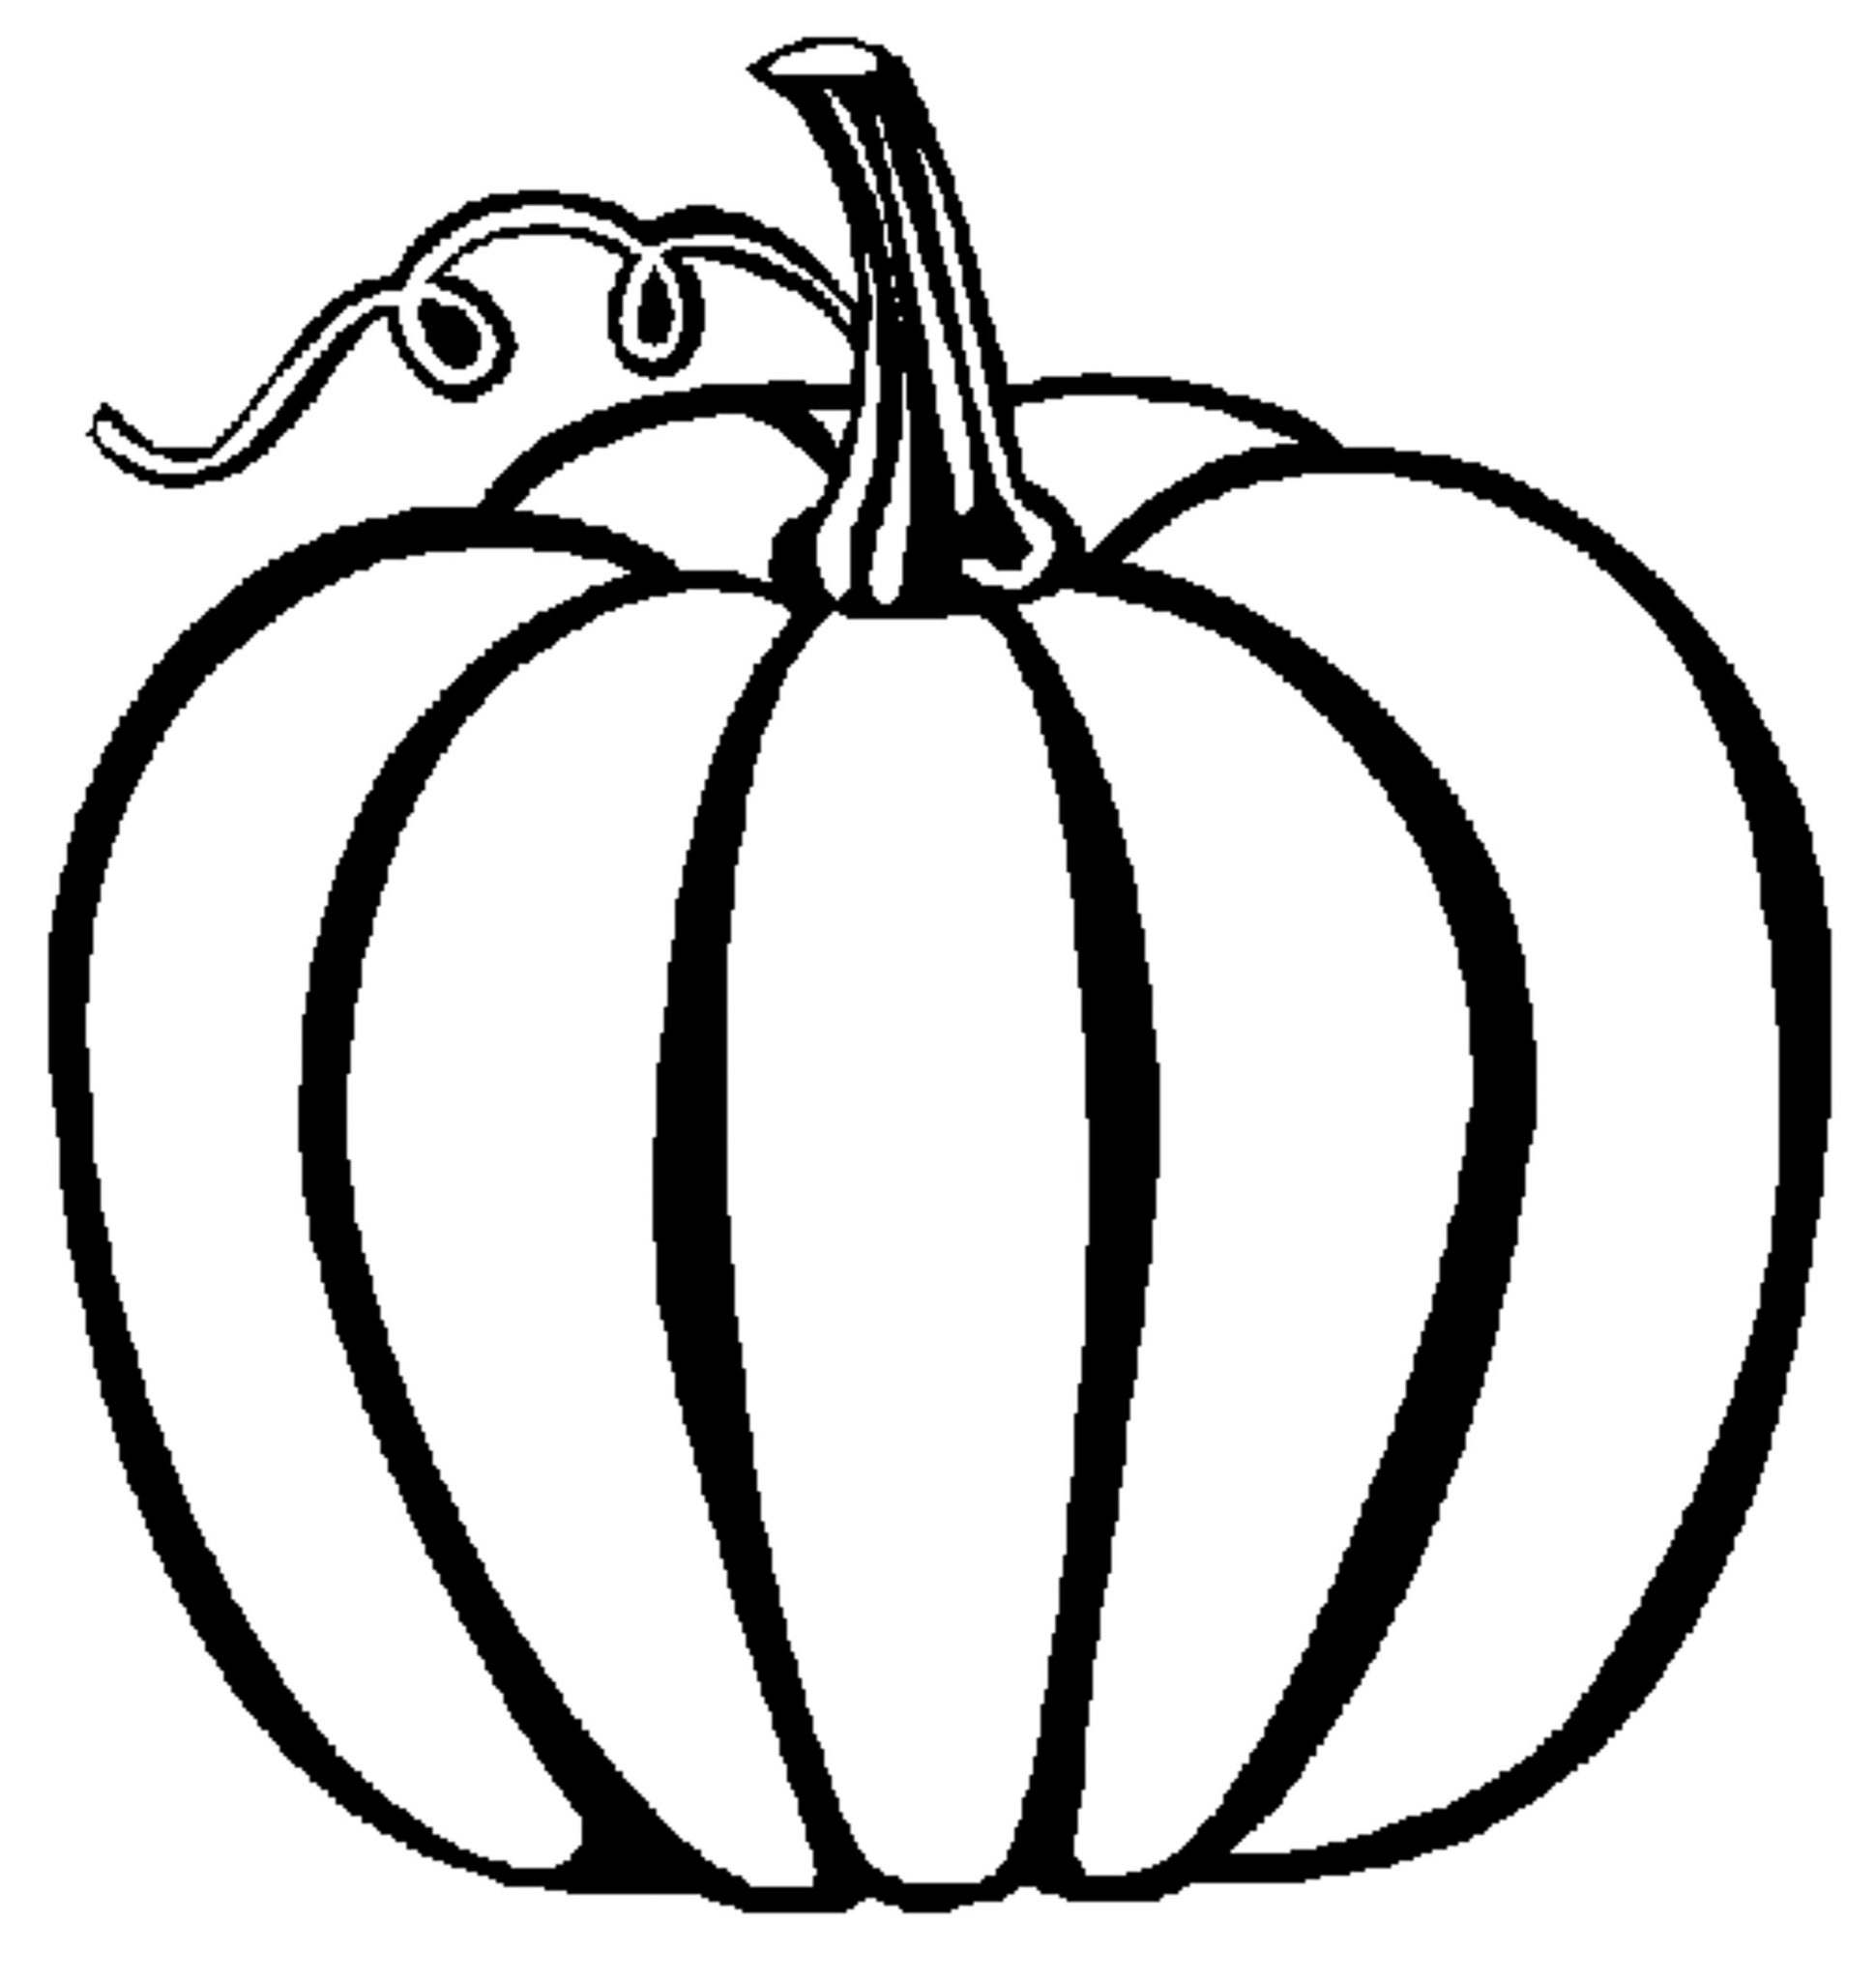 pumpkin coloring pages free printable free printable pumpkin coloring pages for kids pages pumpkin coloring free printable 